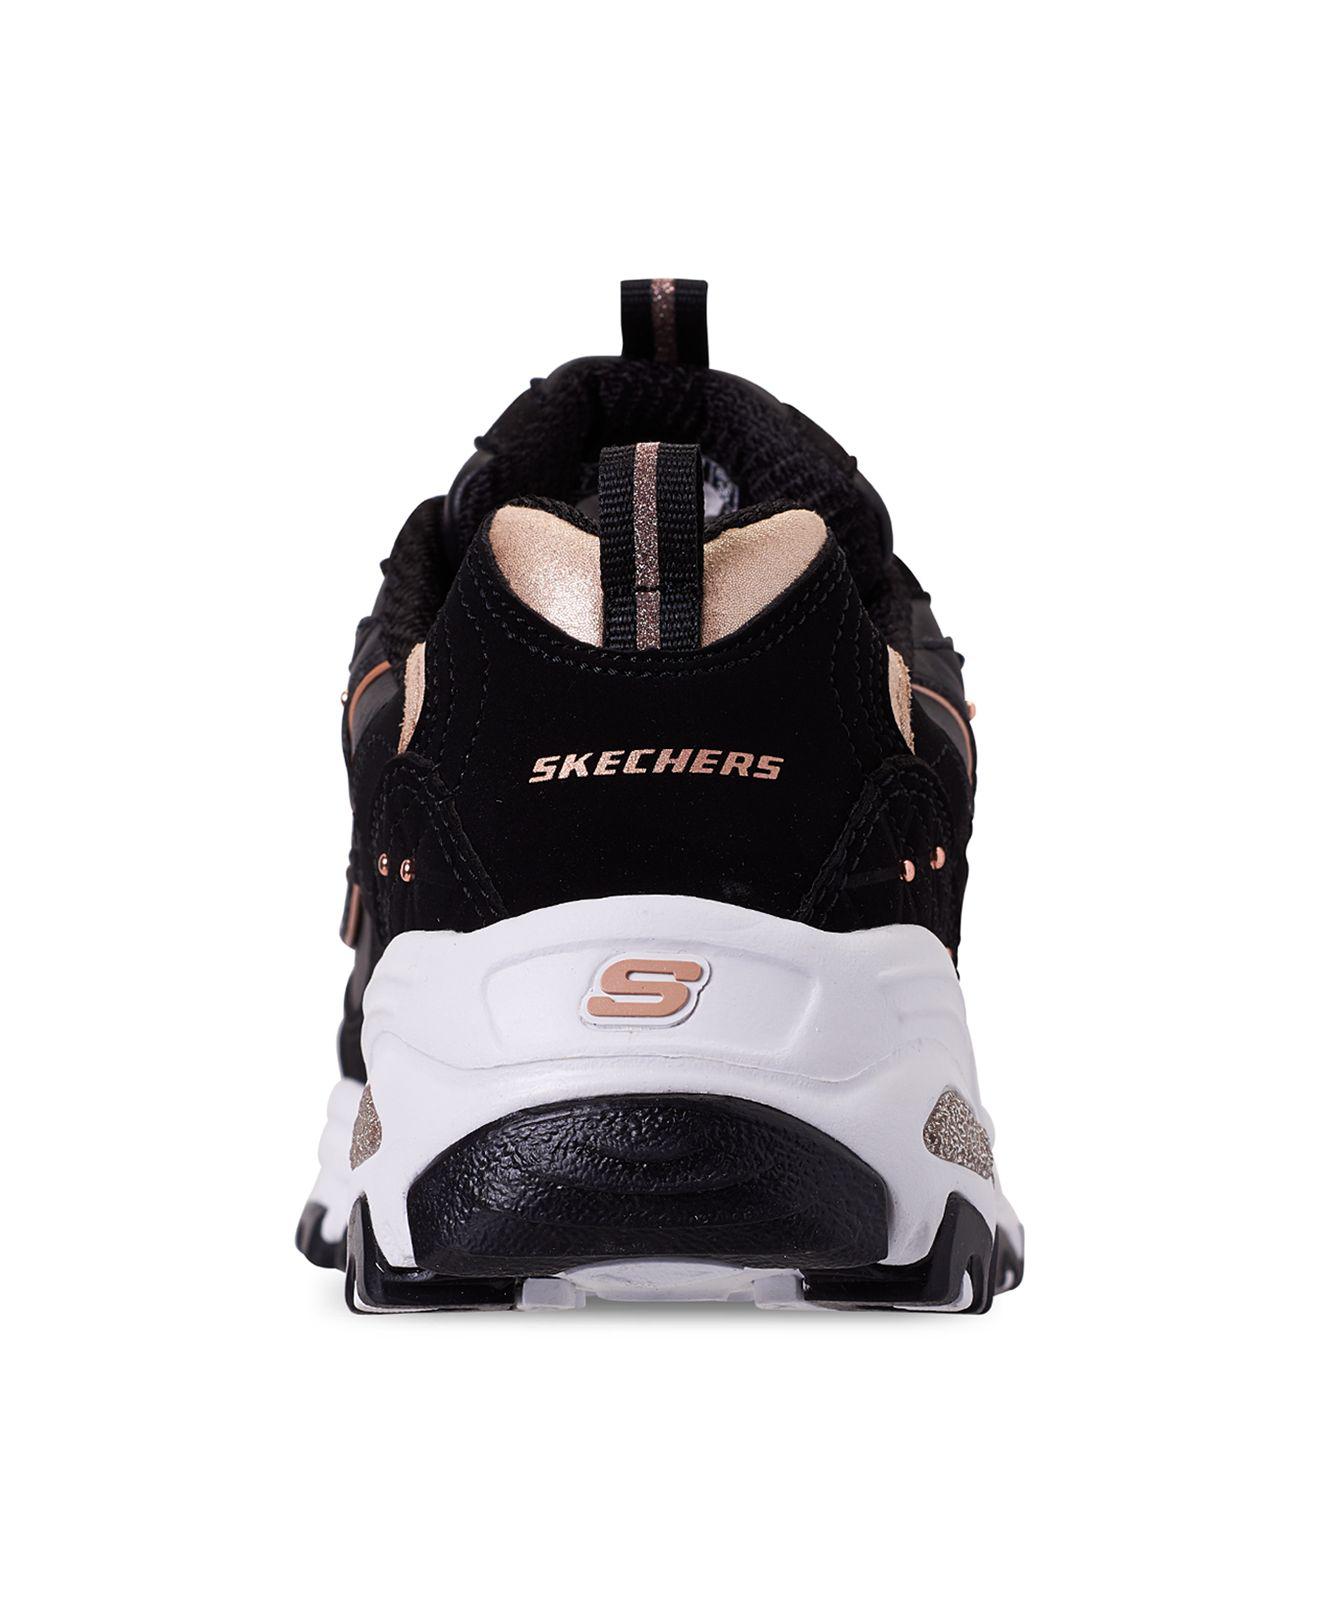 Skechers Leather D'lites - Glamour Feels Walking Sneakers From Finish Line  in Black/Rose Gold (Black) | Lyst